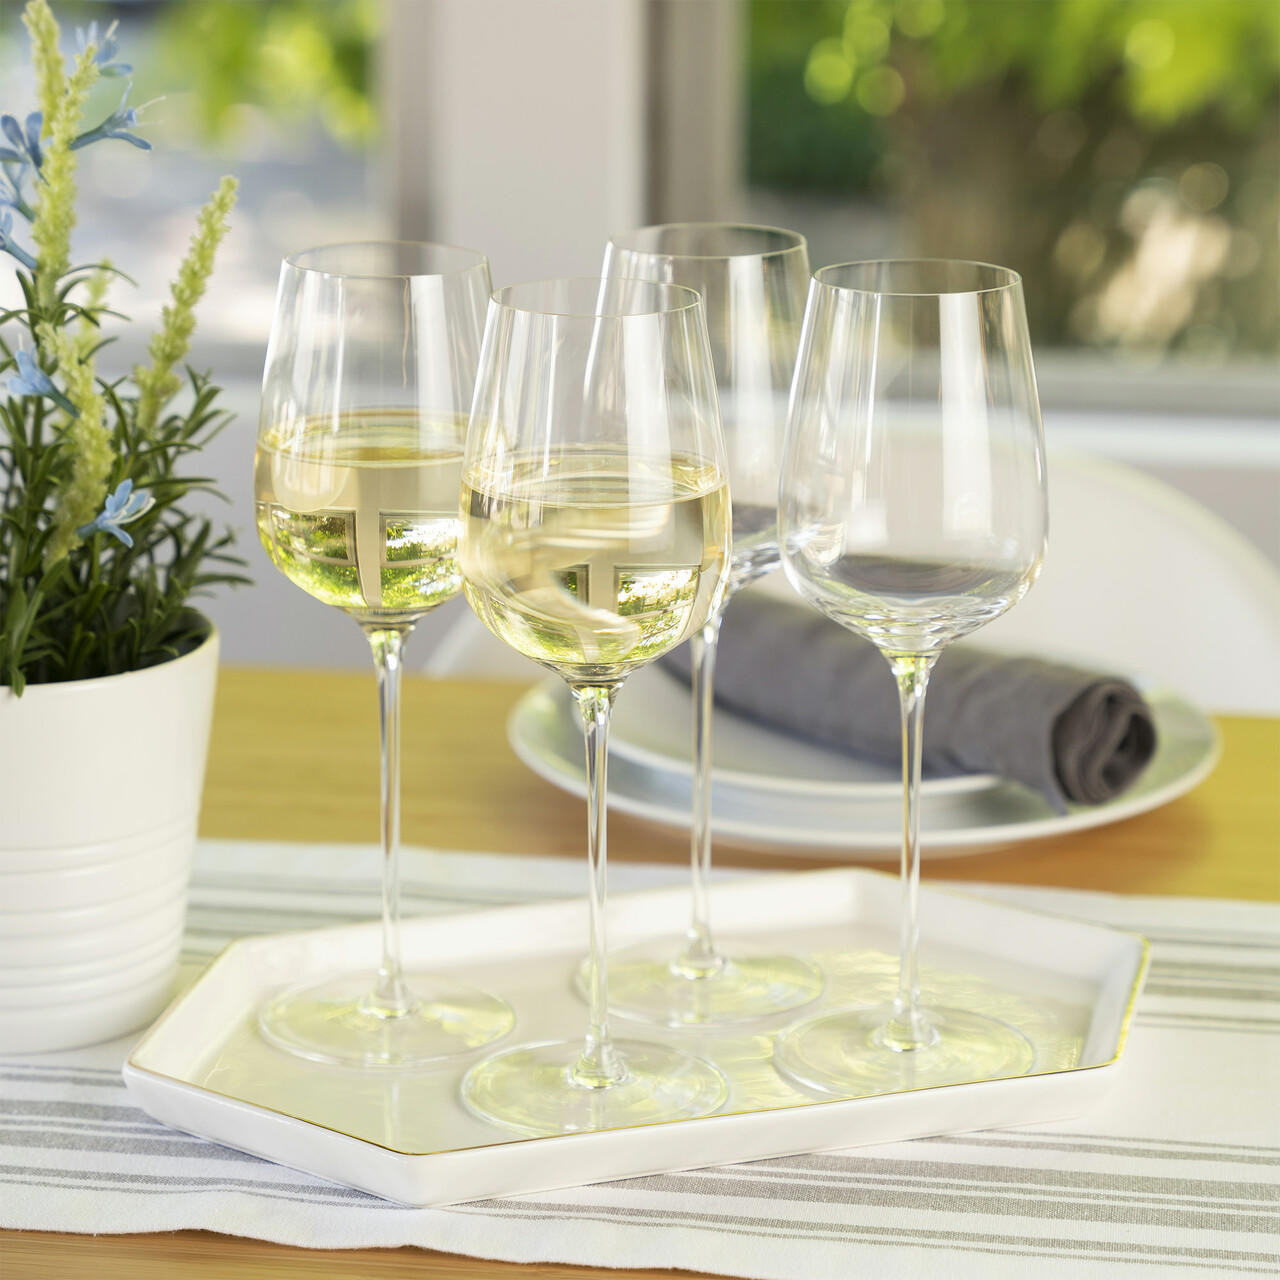 https://cdn11.bigcommerce.com/s-pa7lxgfduc/images/stencil/1280x1280/products/572/2594/marnamaria-purveyors-and-co-spiegelau-willsberger-12.9-oz-white-wine-glass-set-of-4__89270.1643707176.jpg?c=1